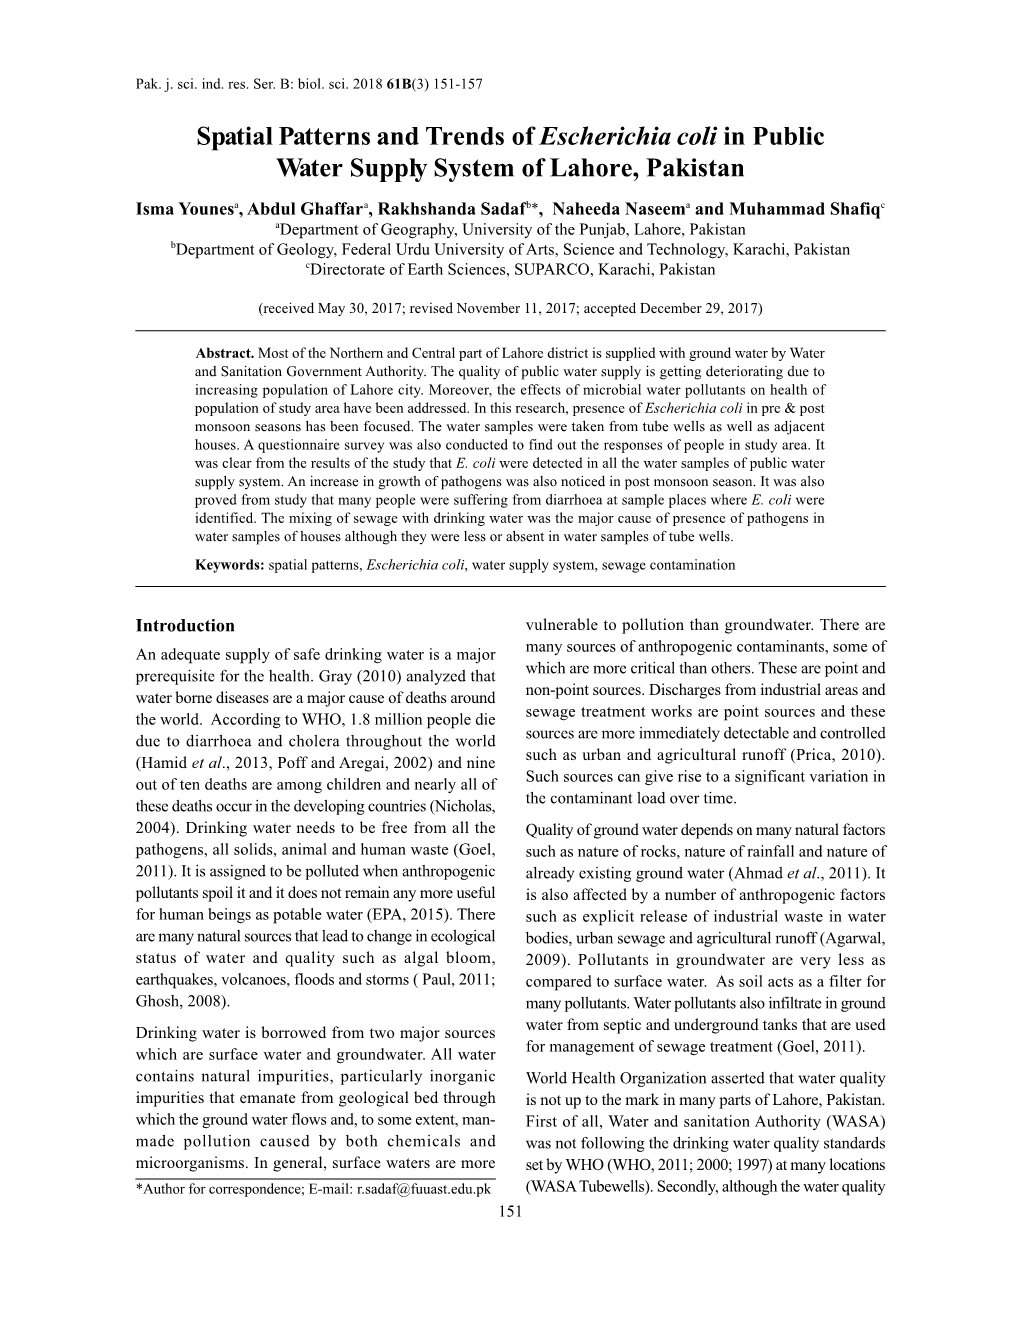 Spatial Patterns and Trends of Escherichia Coli in Public Water Supply System of Lahore, Pakistan